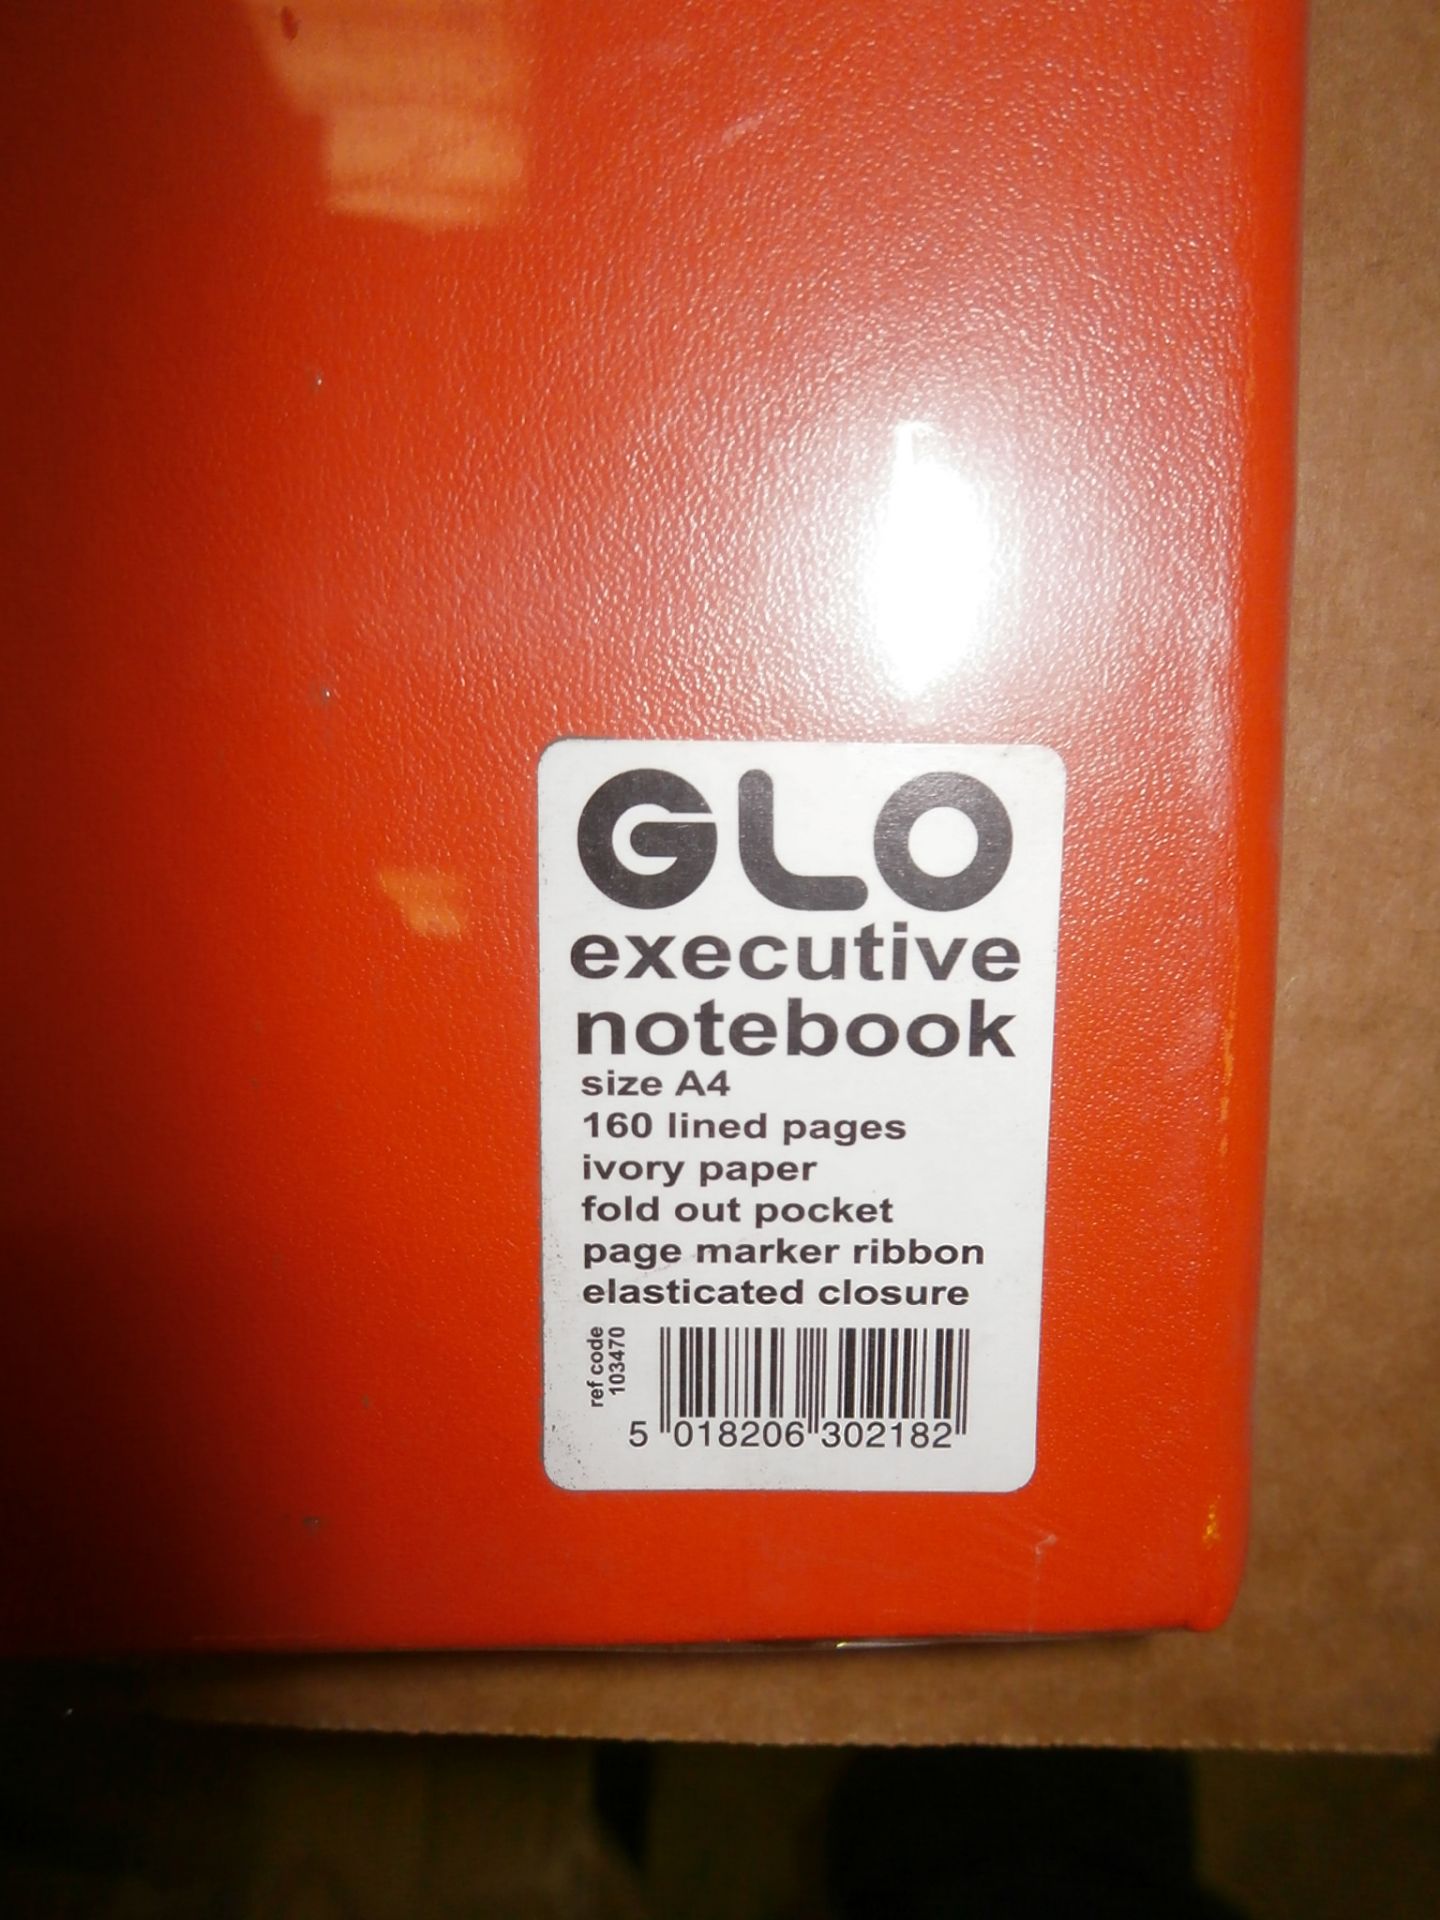 15 x Boxes of Glo Executive A4 Notebooks Orange - 12 Notebooks Per Box, 180 in Total (Cheapest - Image 3 of 4